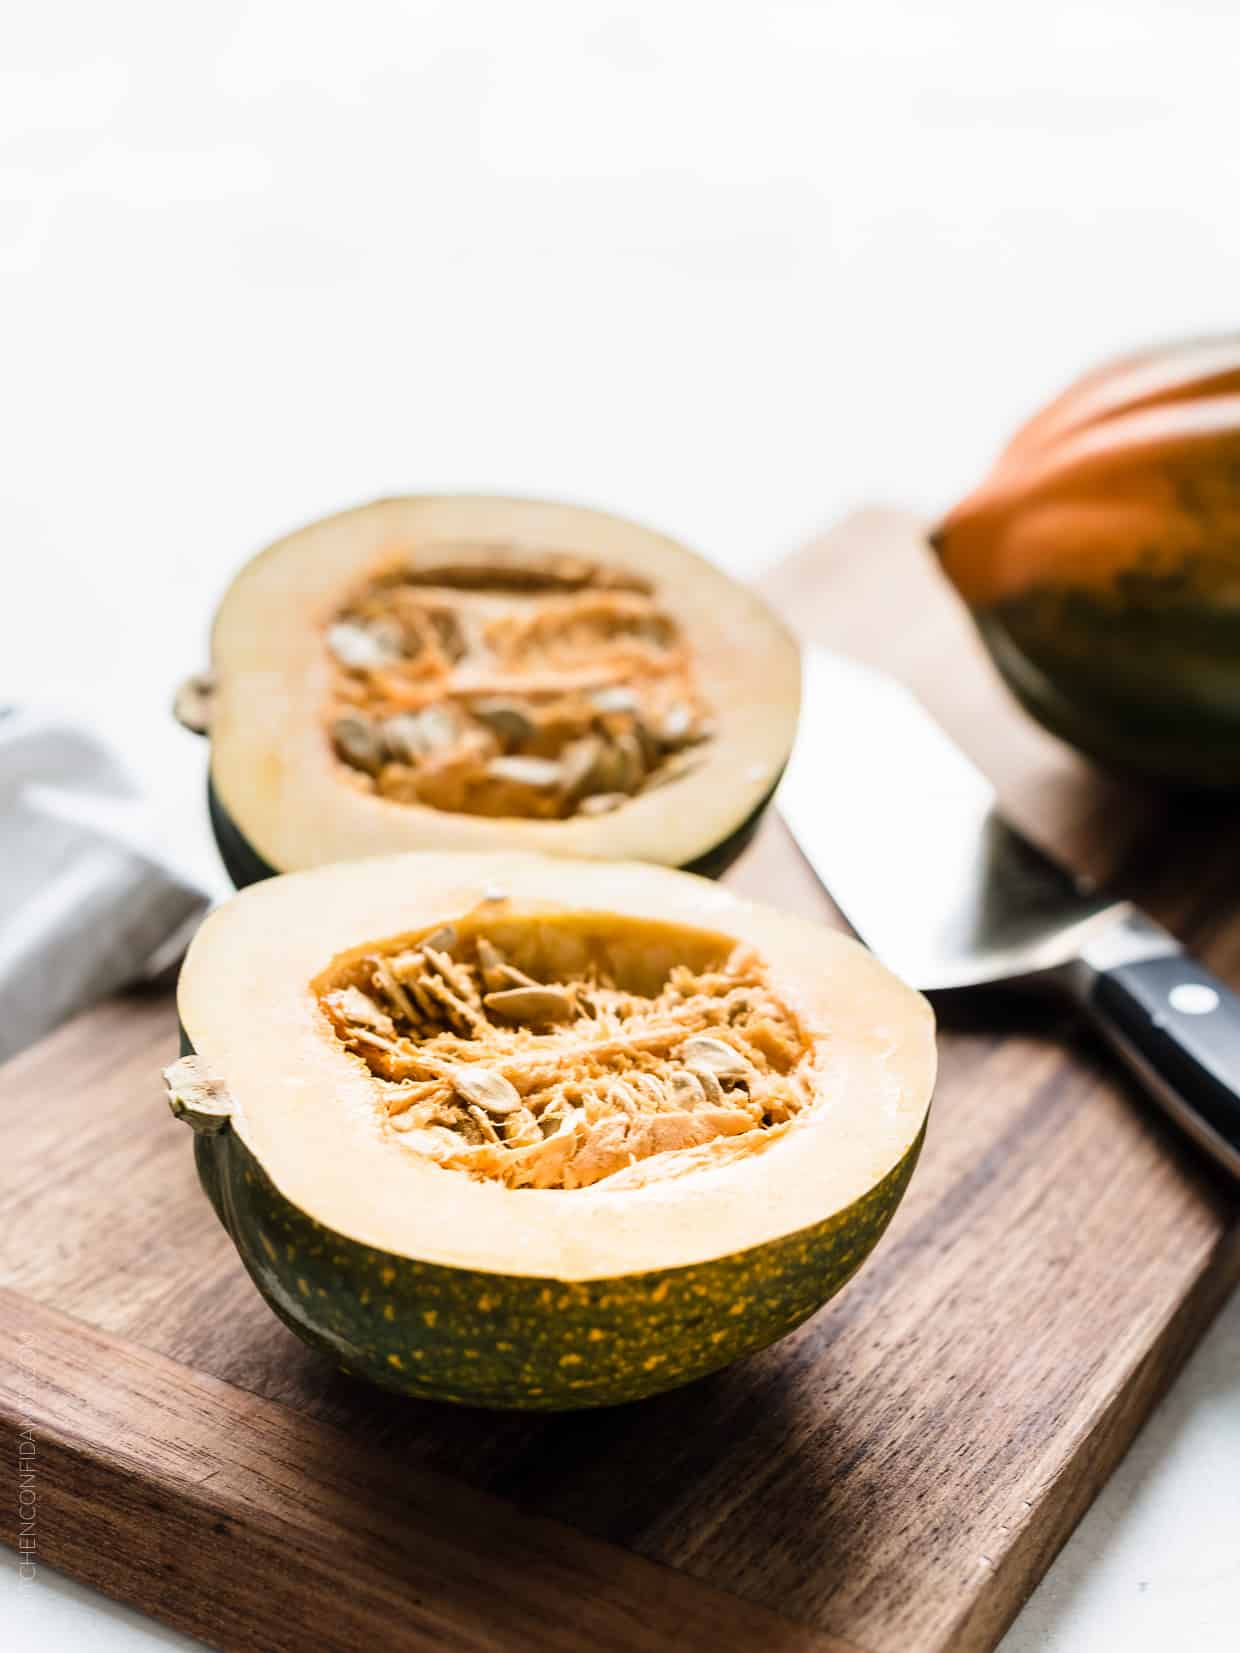 Acorn squash cut in half on a wooden cutting board with a chef's knife in the background.